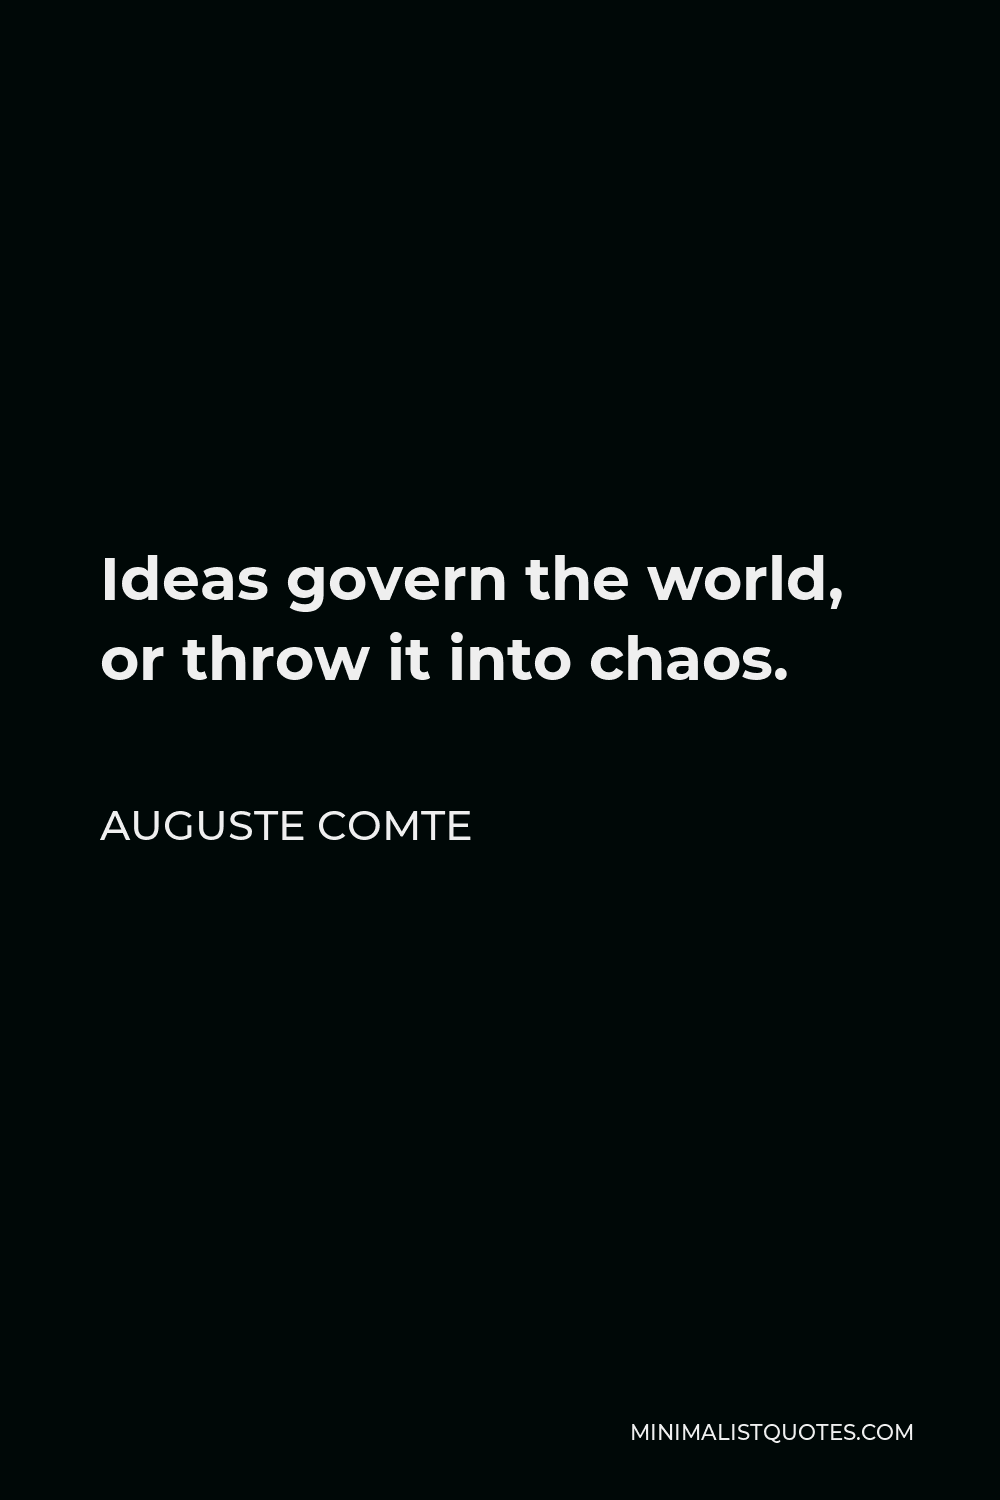 Auguste Comte Quote - Ideas govern the world, or throw it into chaos.